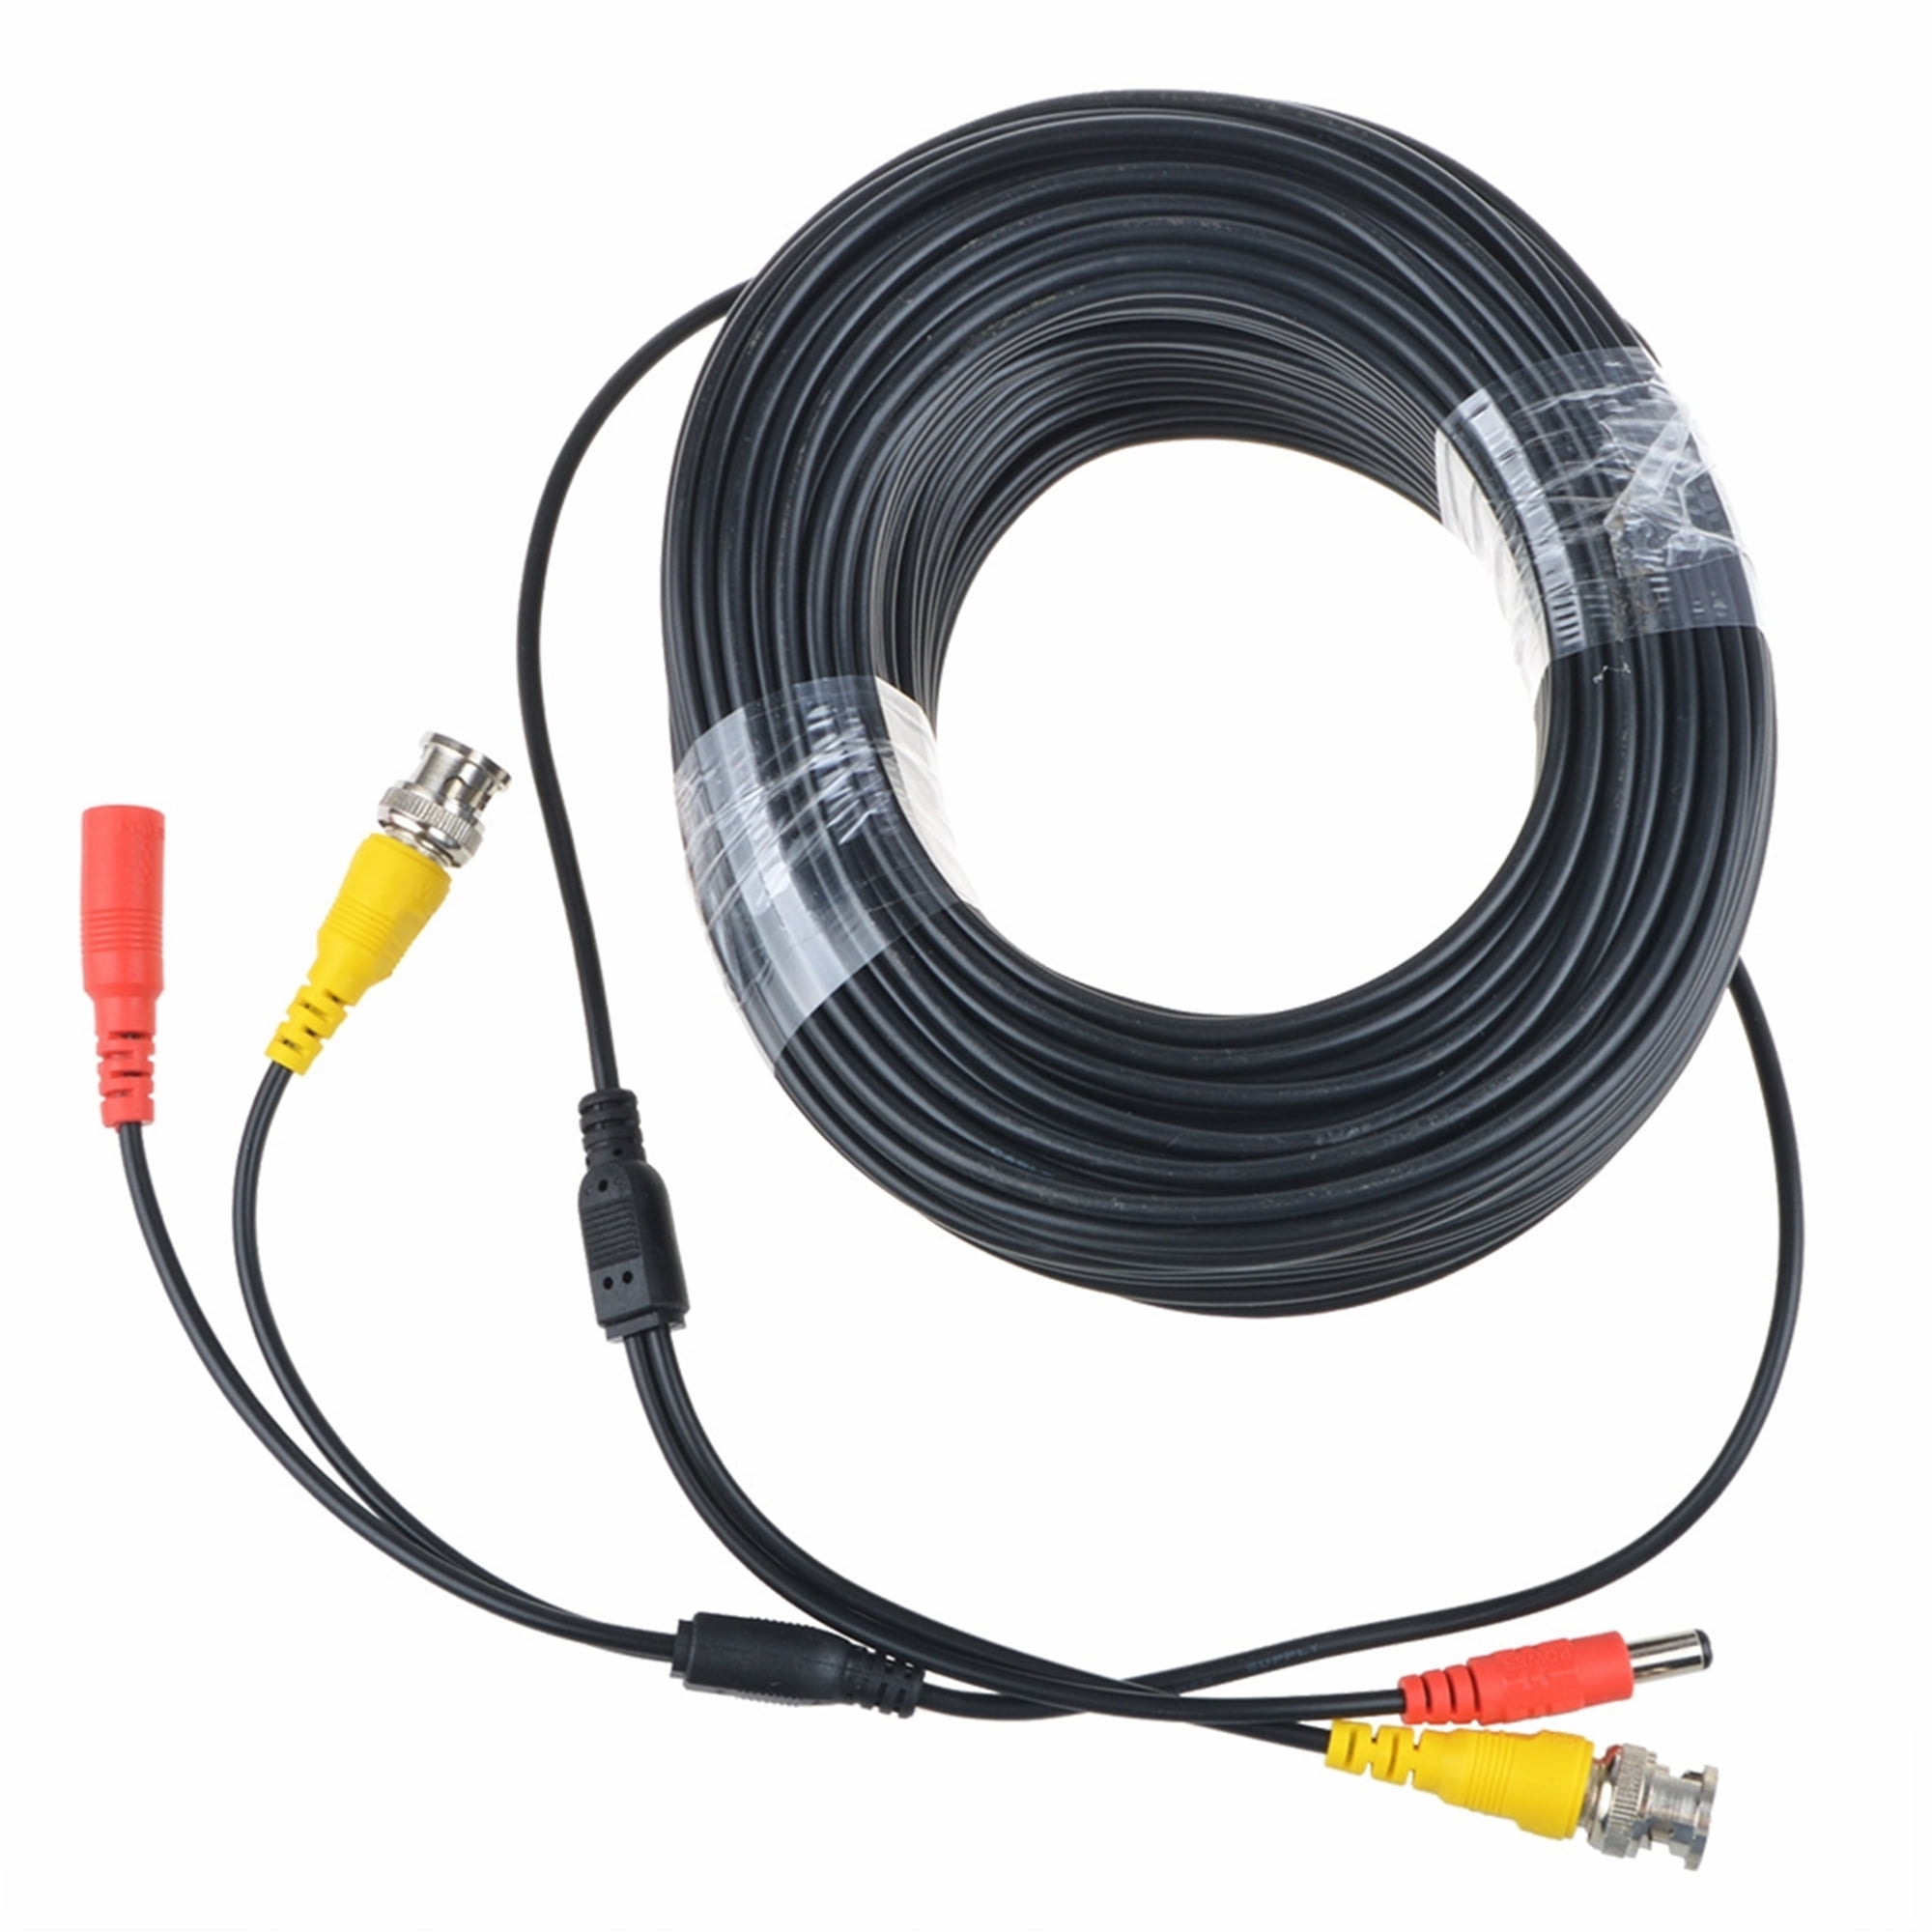 Fite ON 25ft BNC Video and Power Cable Cord for CCTV Security Cameras Defender 